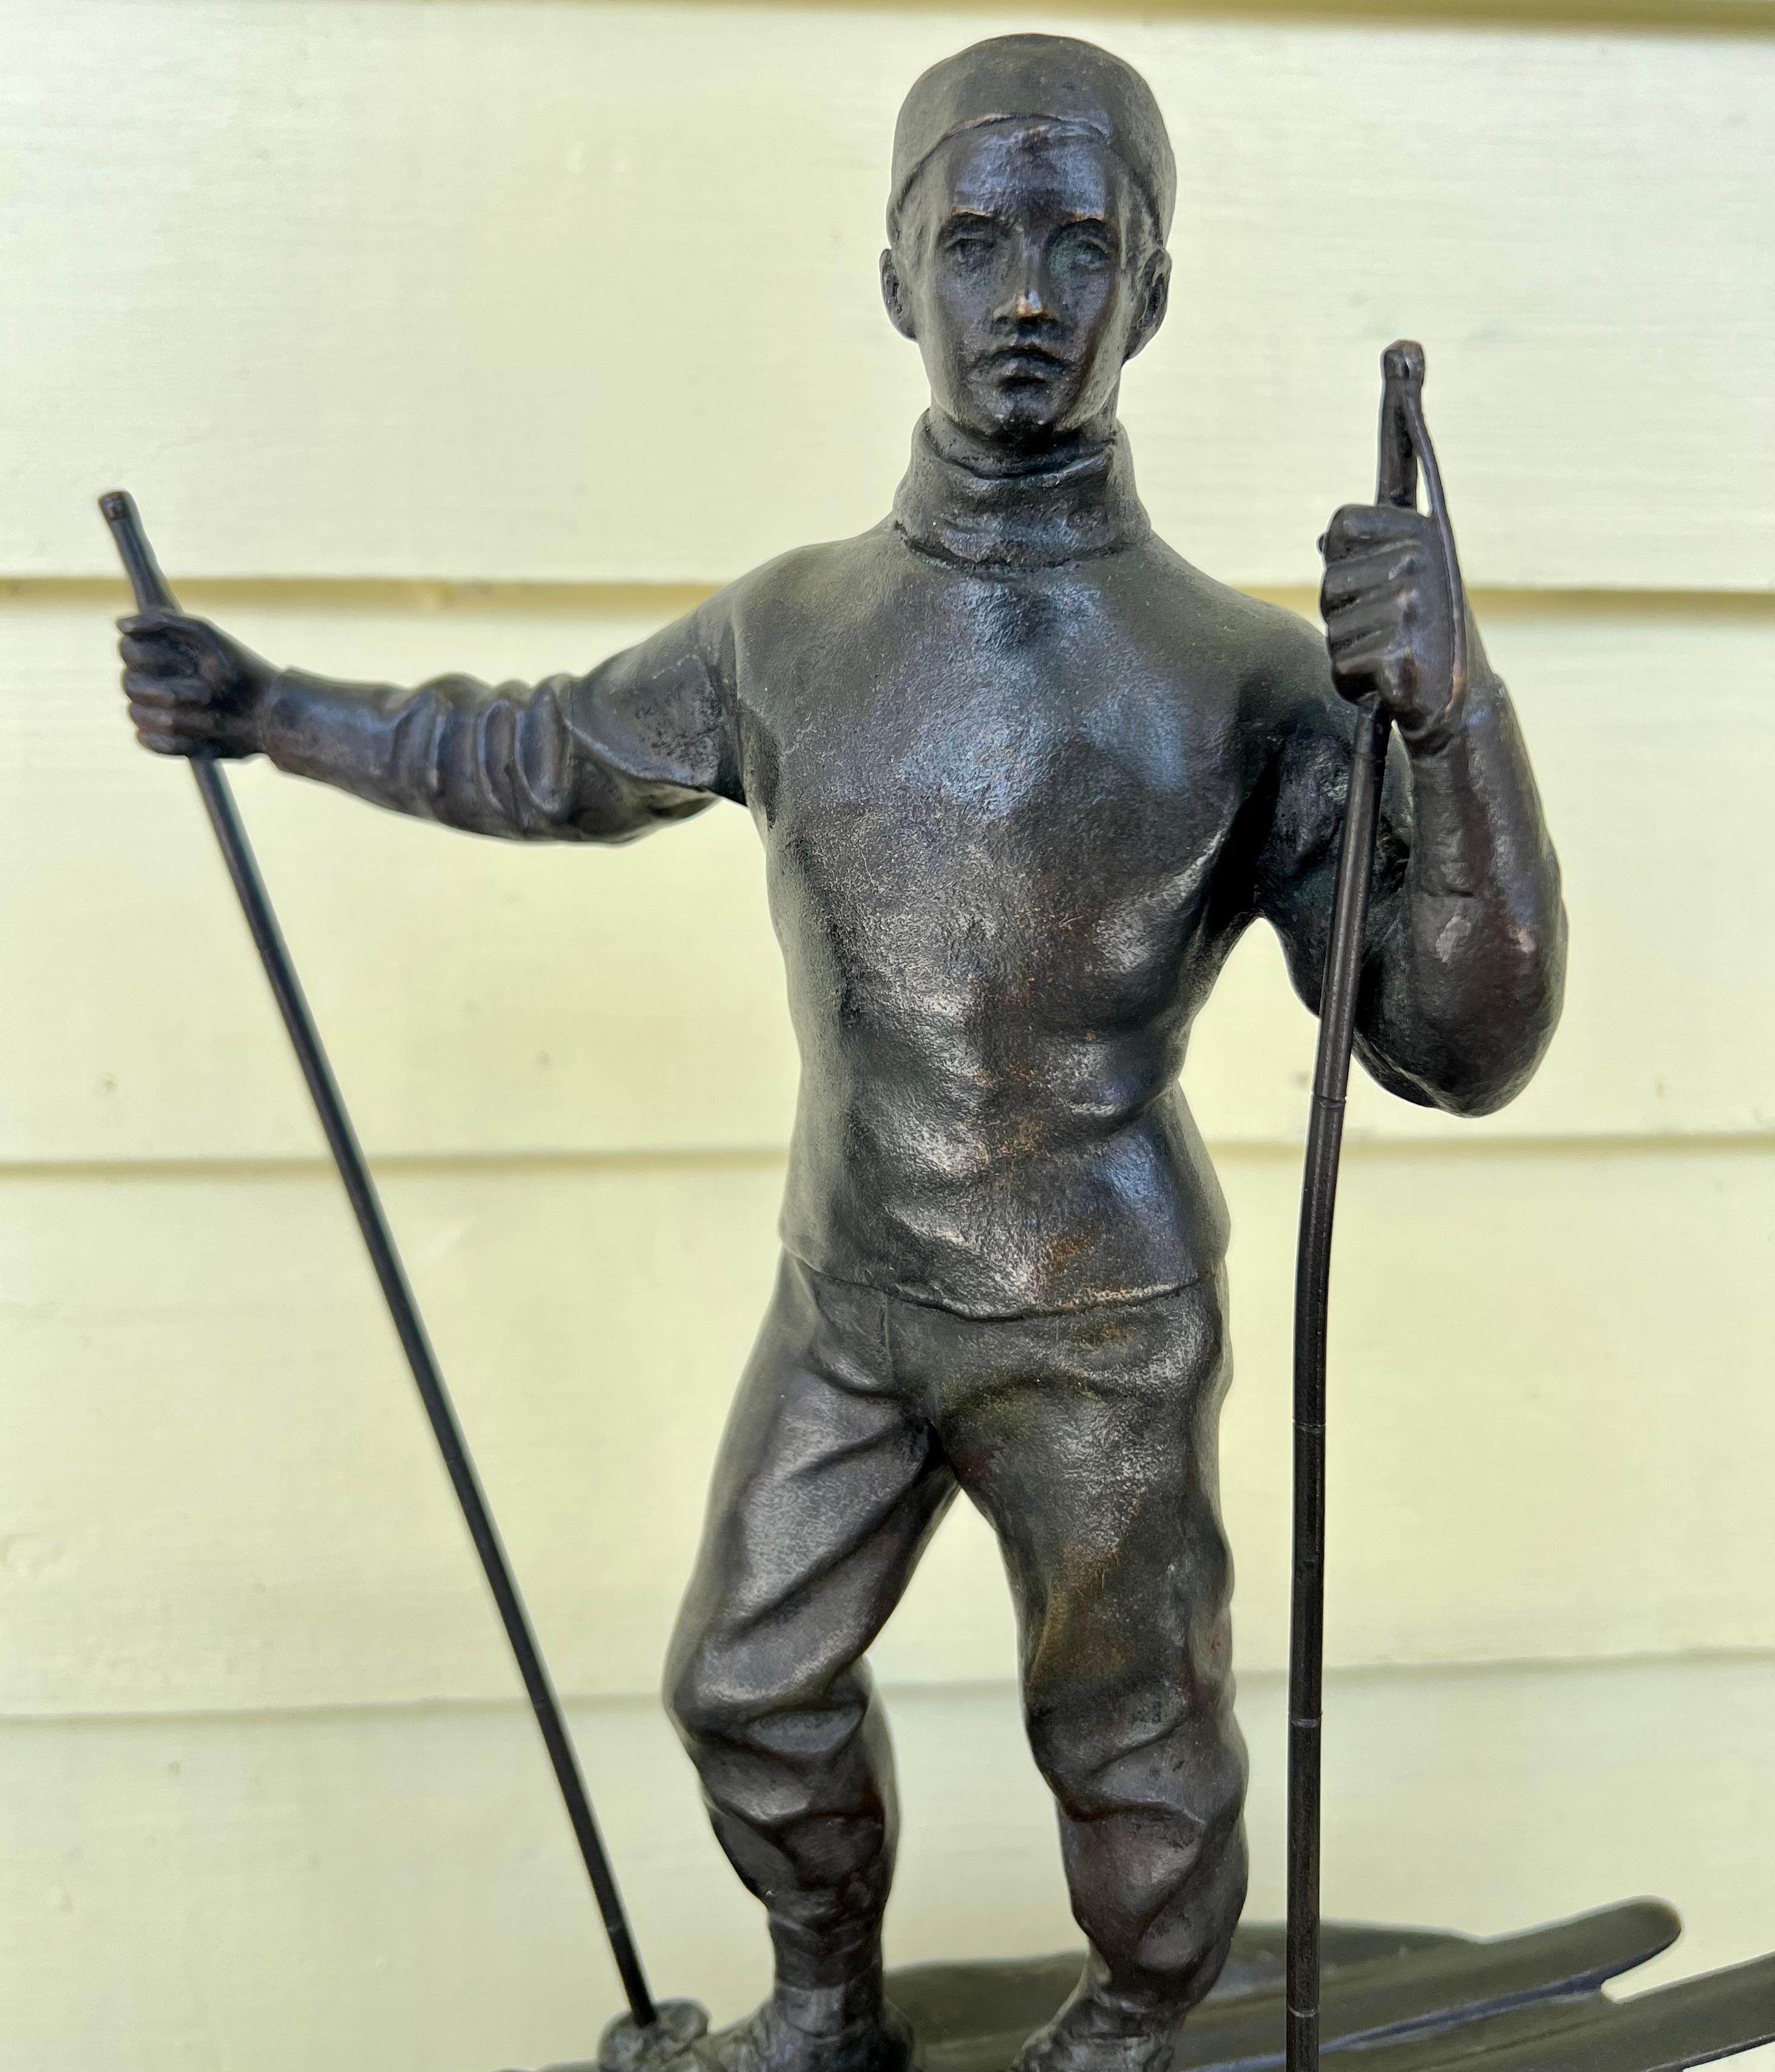 Sterling Silver Rare Early 20th Century Skiing Award from Sweden with Bronze by Gerda Sprinchorn